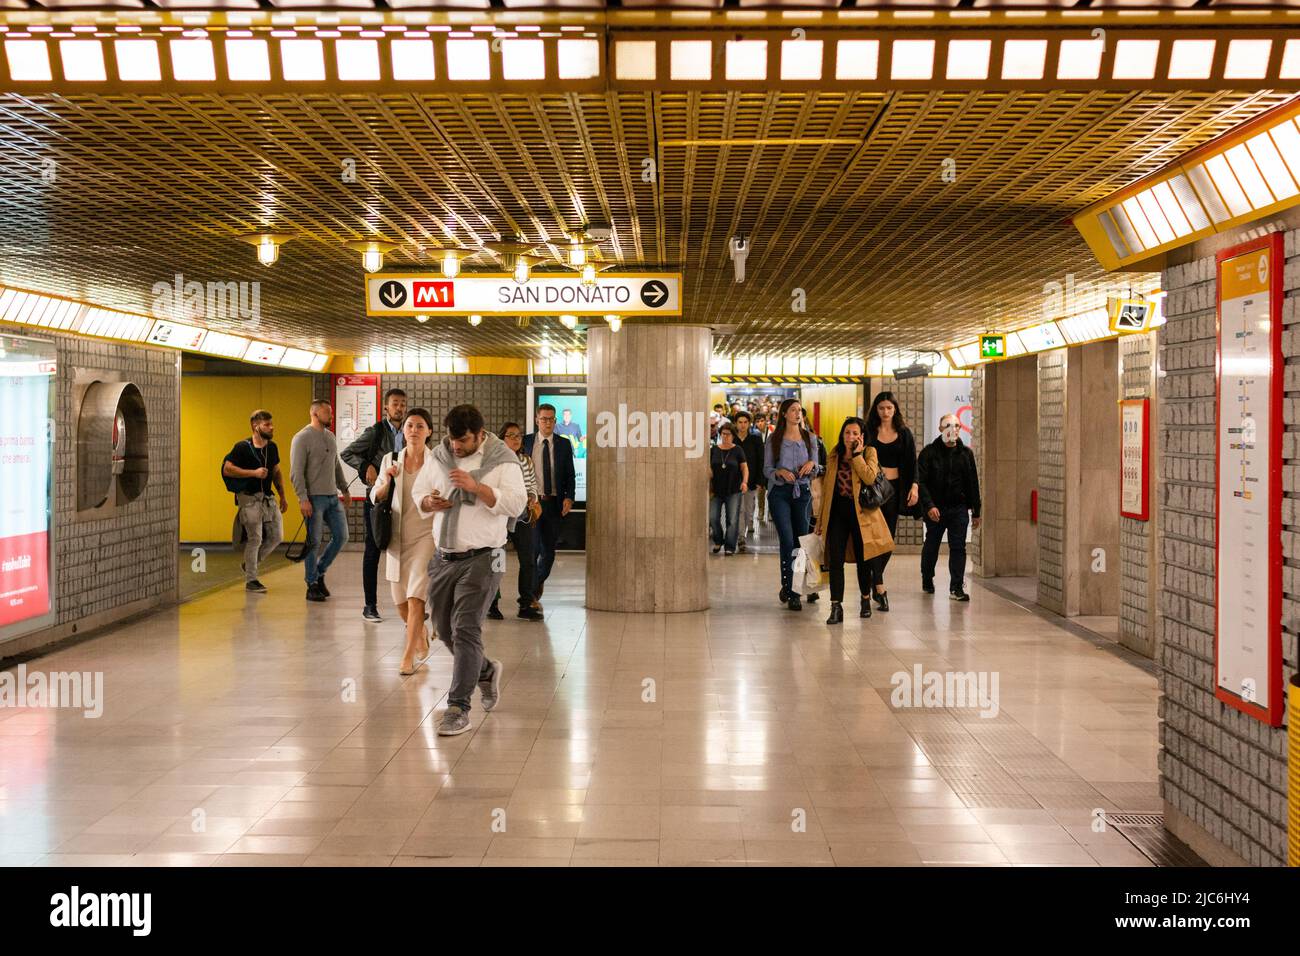 October 3, 2019, Milan, Lombardy, Italy: Comuters and travelers pass through the Duomo metro station in Milan Italy on October 3, 2018. This is one of the largest stations in the city and is located right in the city center. The metro lines M1 and M3 connect here. (Credit Image: © Mychelle Vincent/Alto Press via ZUMA Press) Stock Photo